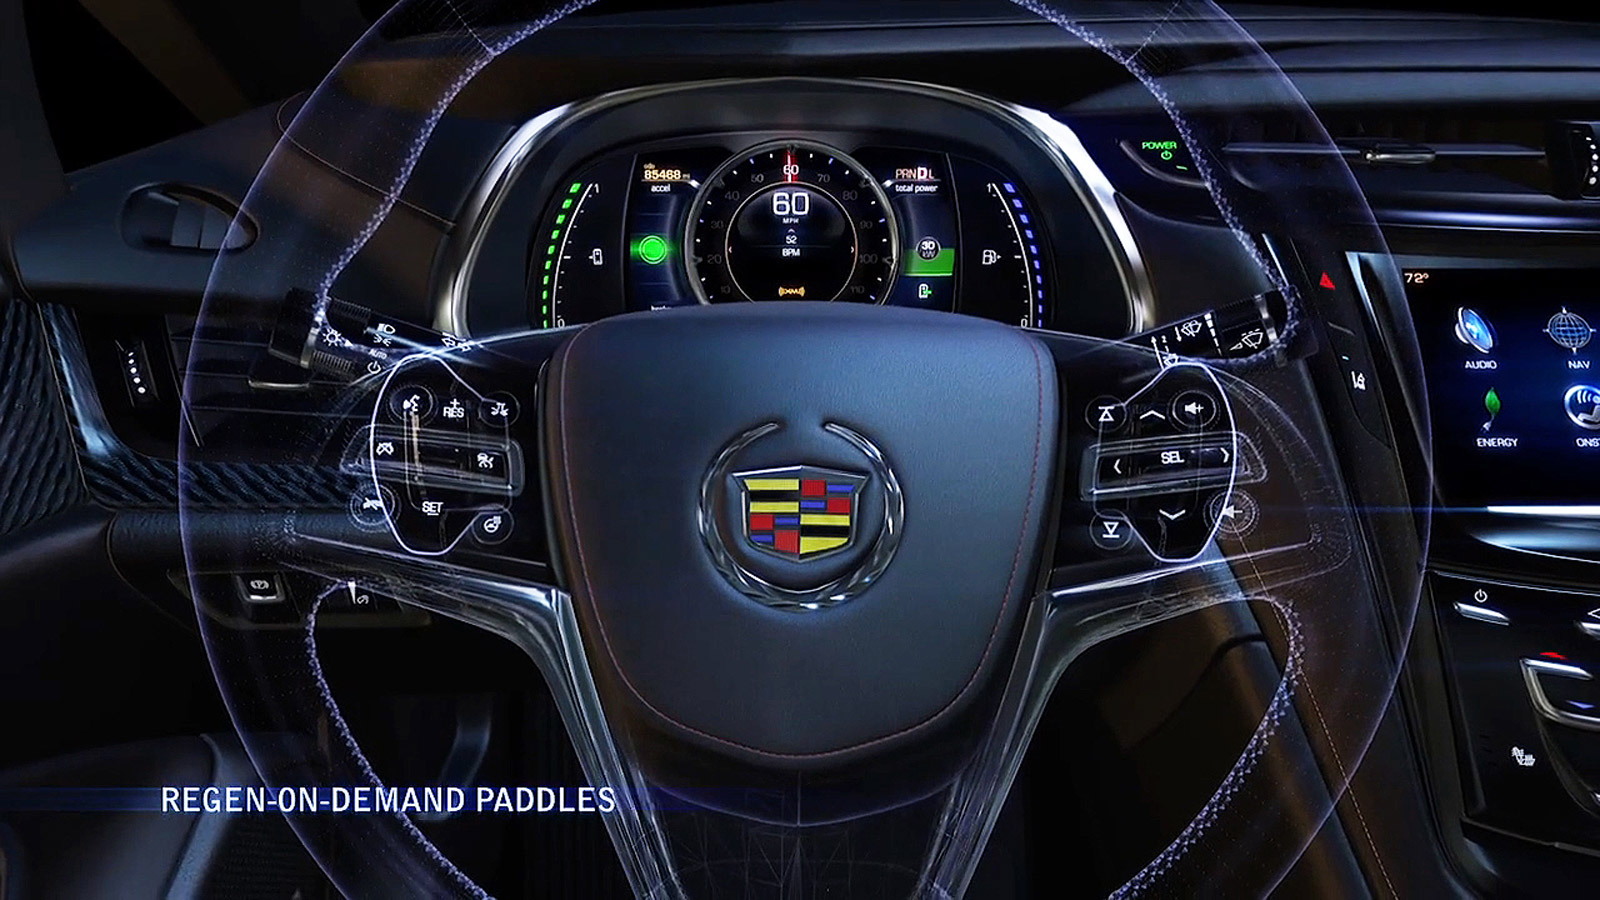 2014 Cadillac ELR 'Regen on Demand' paddle shifters